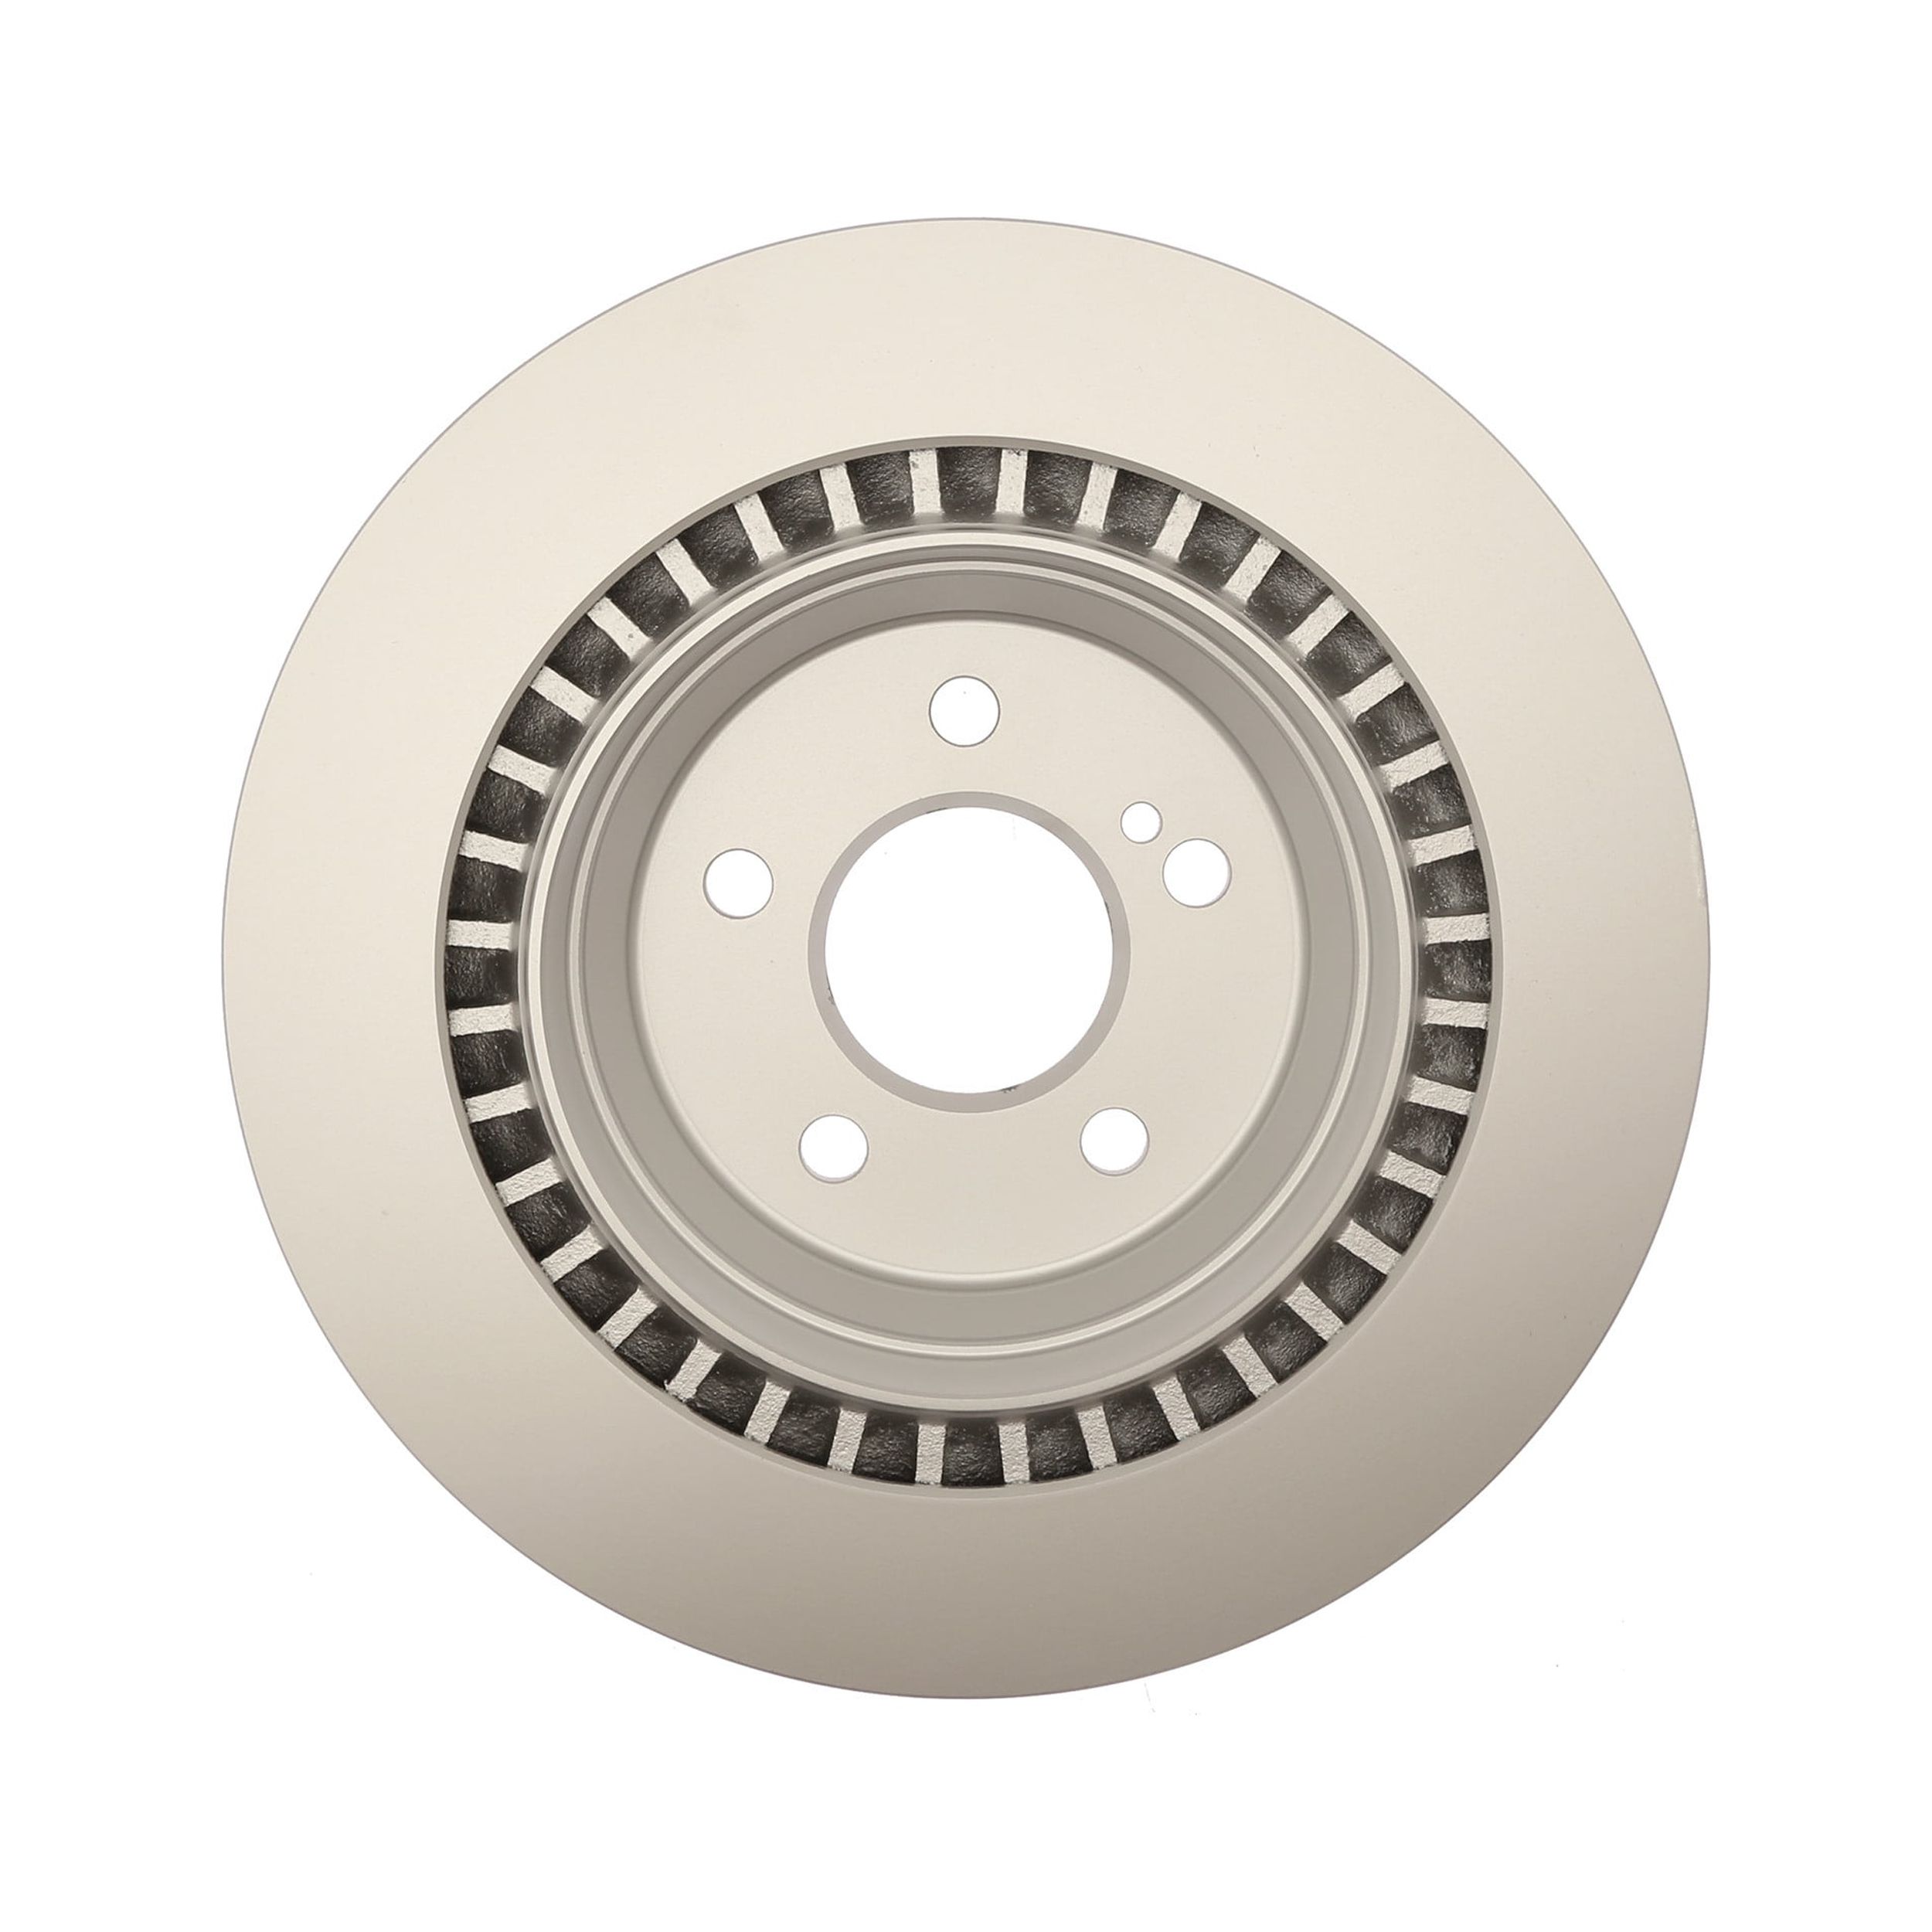 Raybestos Specialty Performance Rotors, 982122 Fits select: 2013 MERCEDES-BENZ S, 2009 MERCEDES-BENZ S 550 4MATIC - image 2 of 6